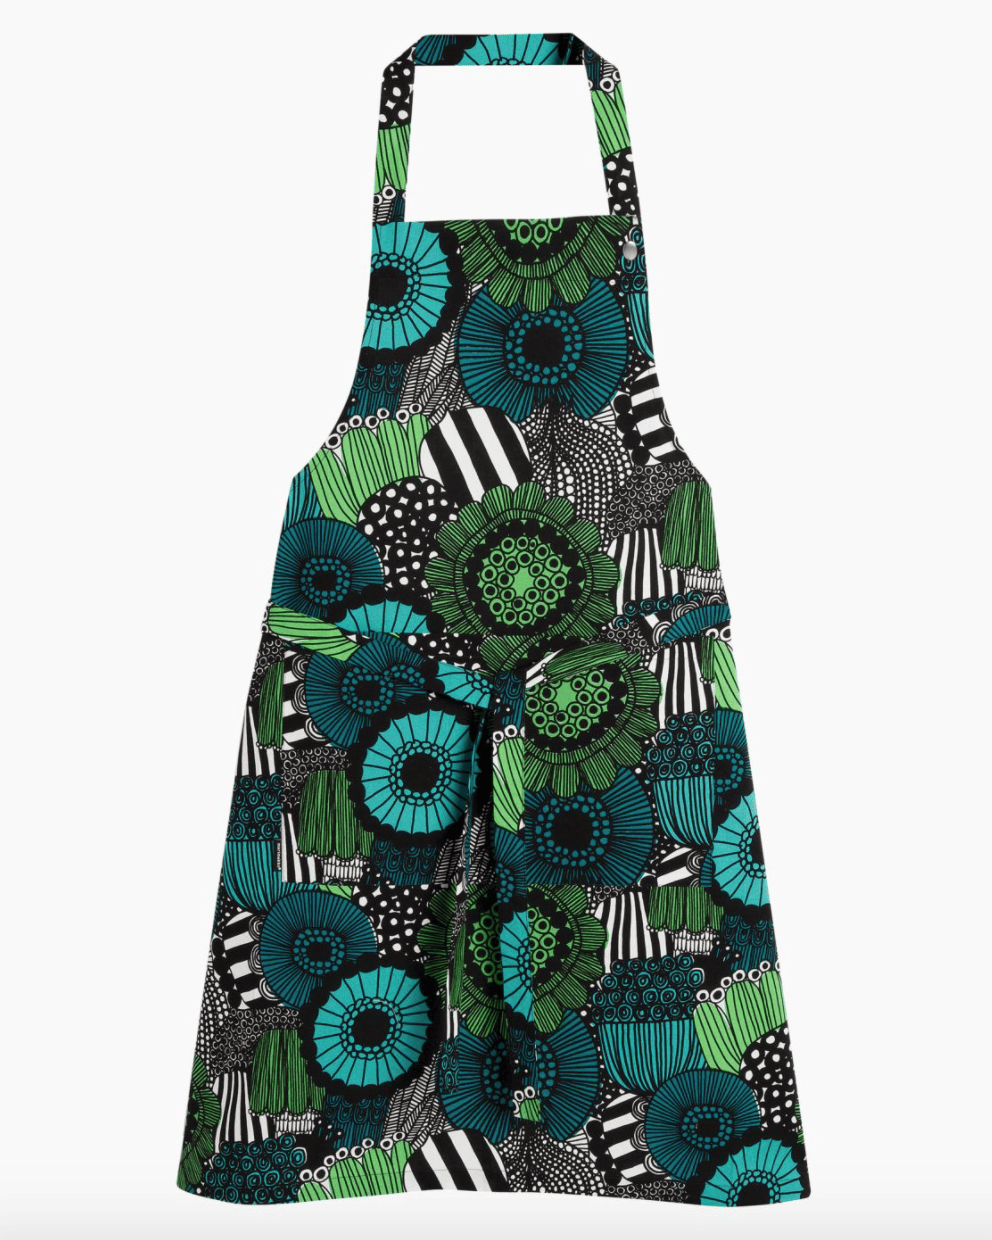 A graphic green and blue floral apron.